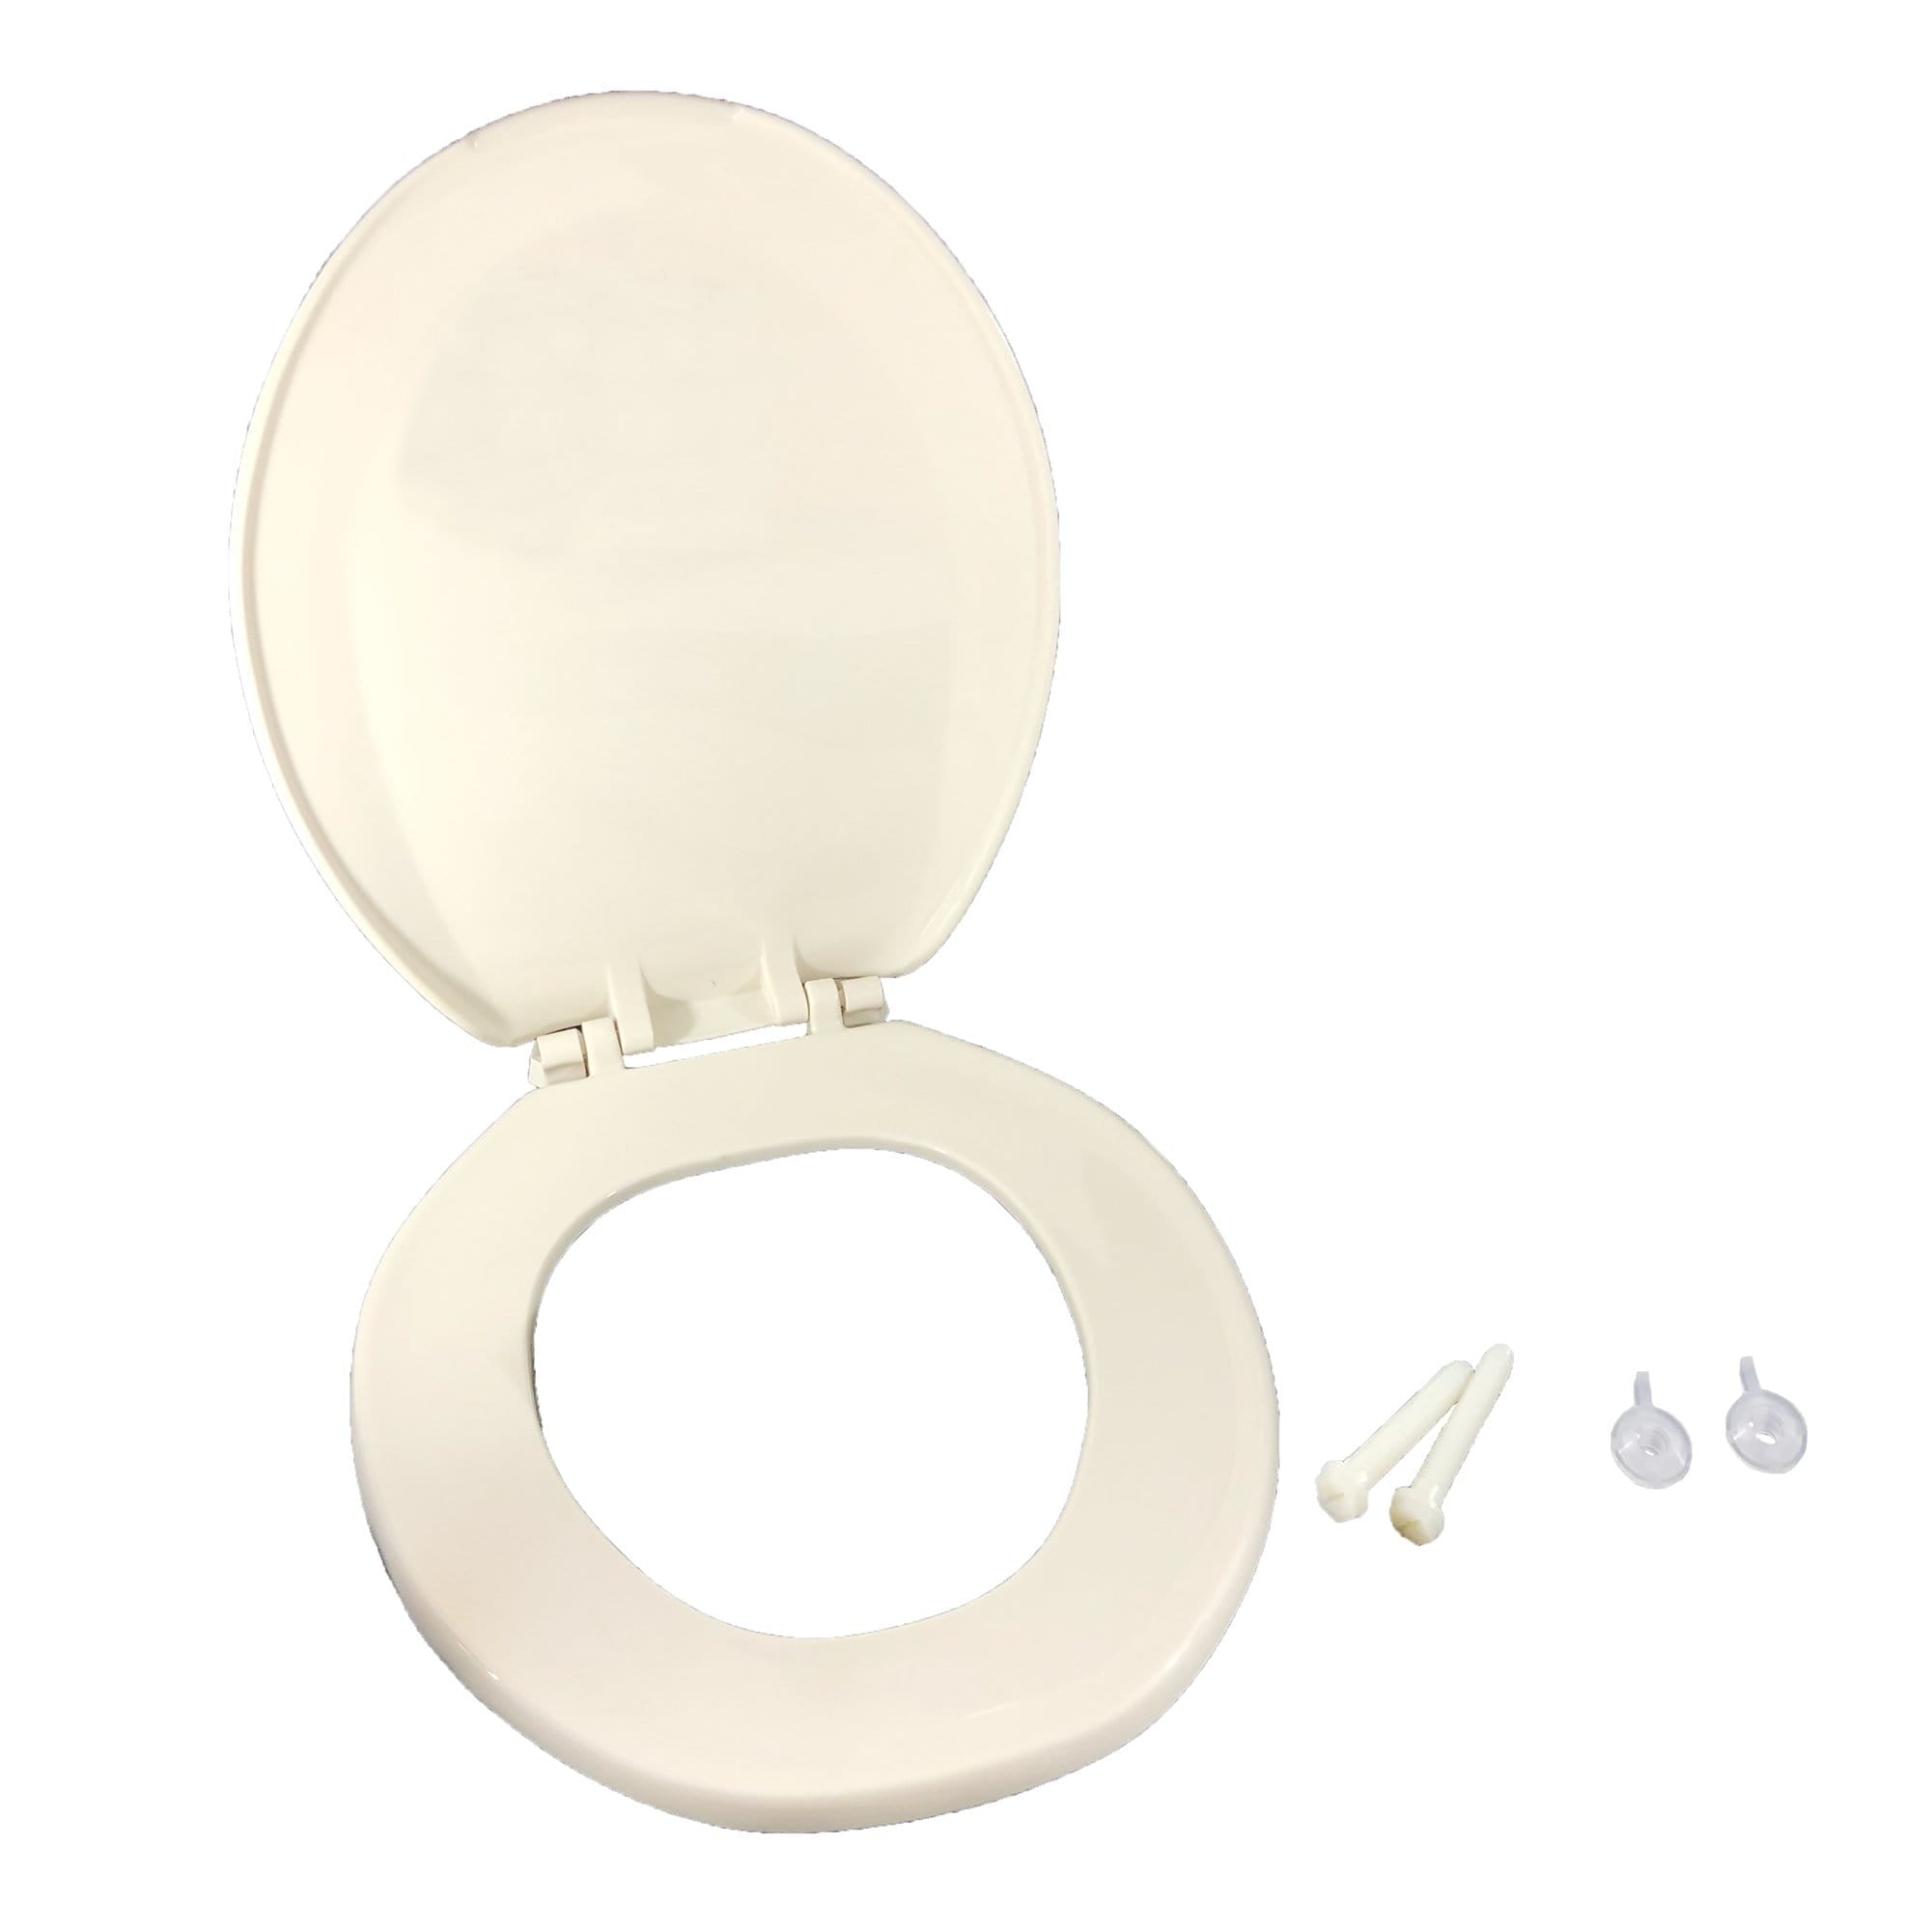 Thetford 34145 Style Lite Toilet Seat & Cover Assembly, Bone